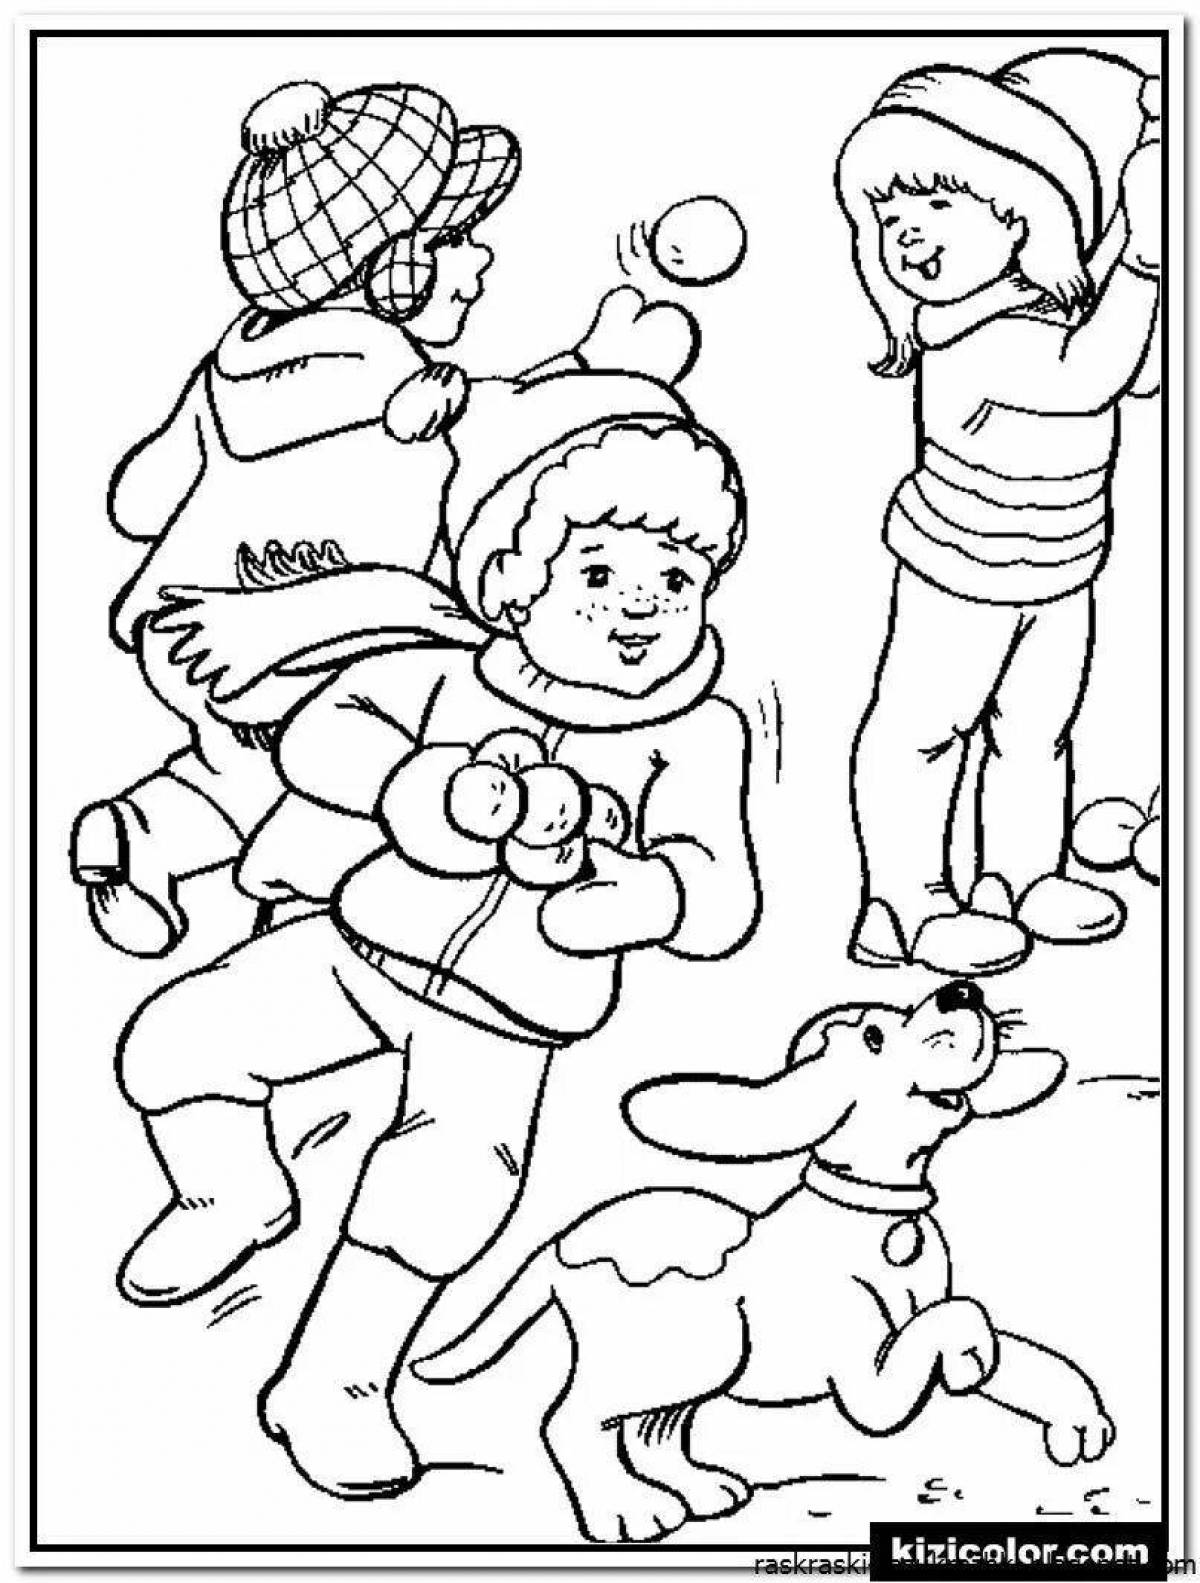 Fantastic snowball coloring book for kids